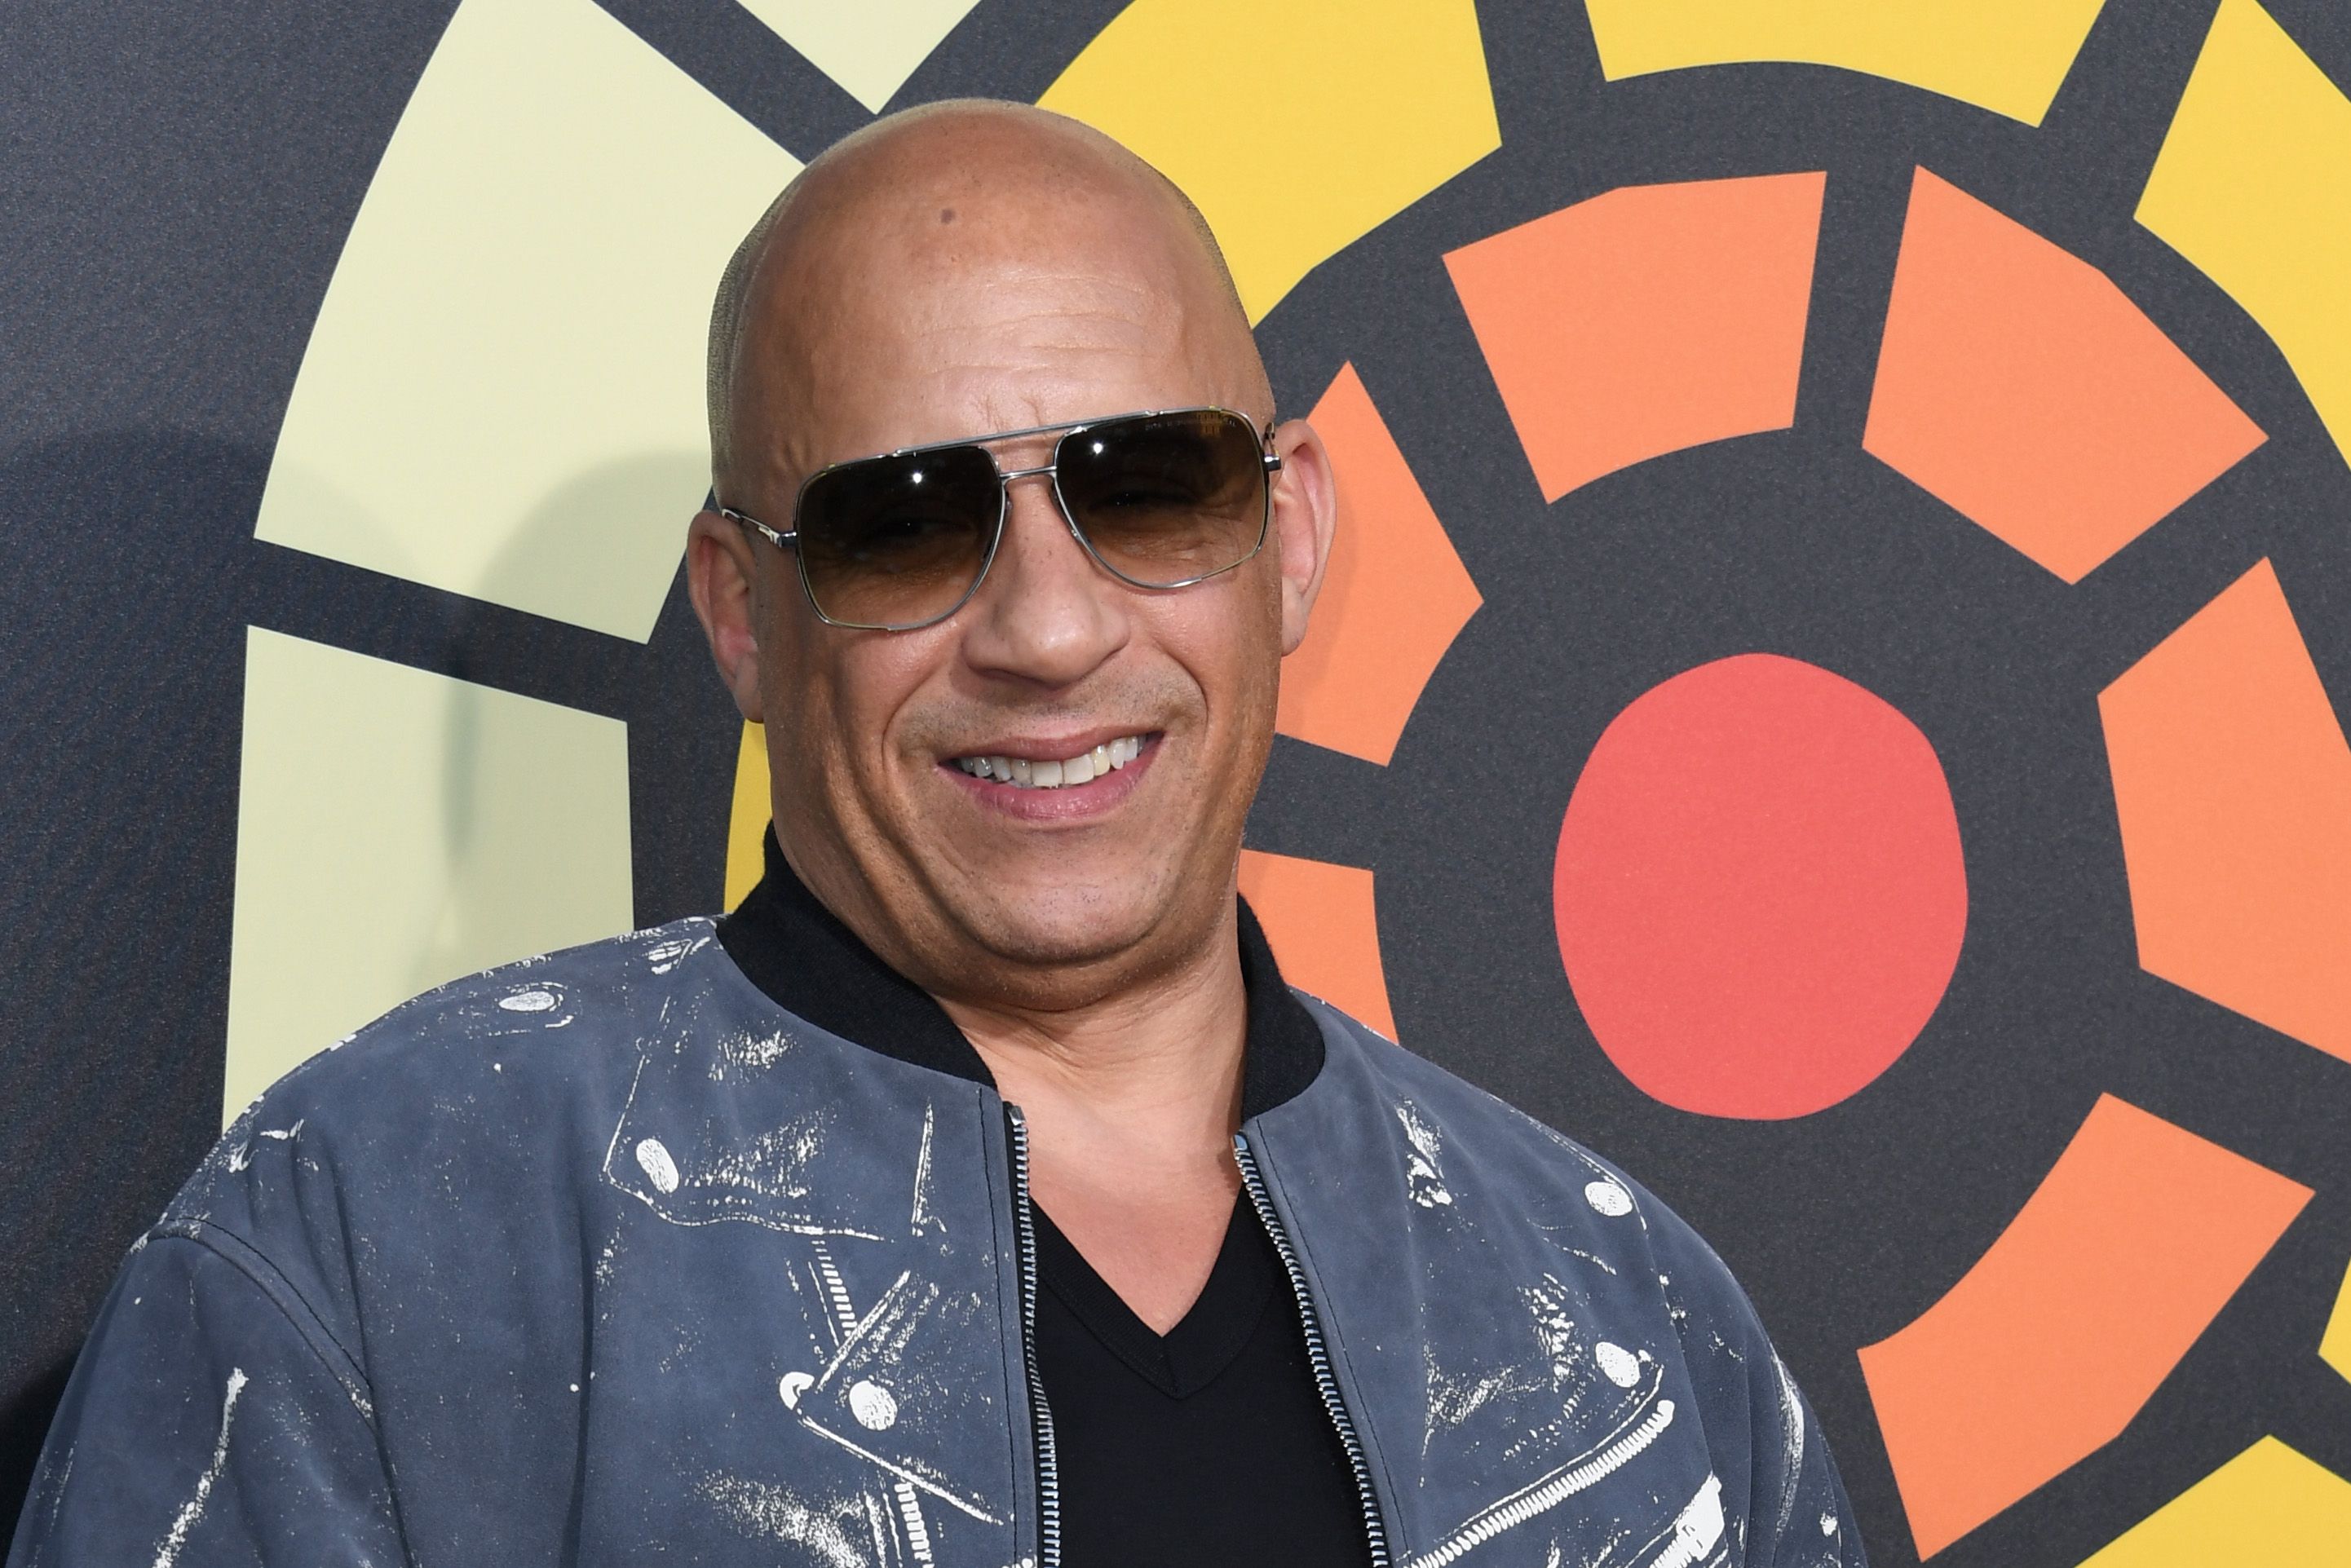 Vin Diesel smiling wearing sunglasses in front of an orange and yellow background.